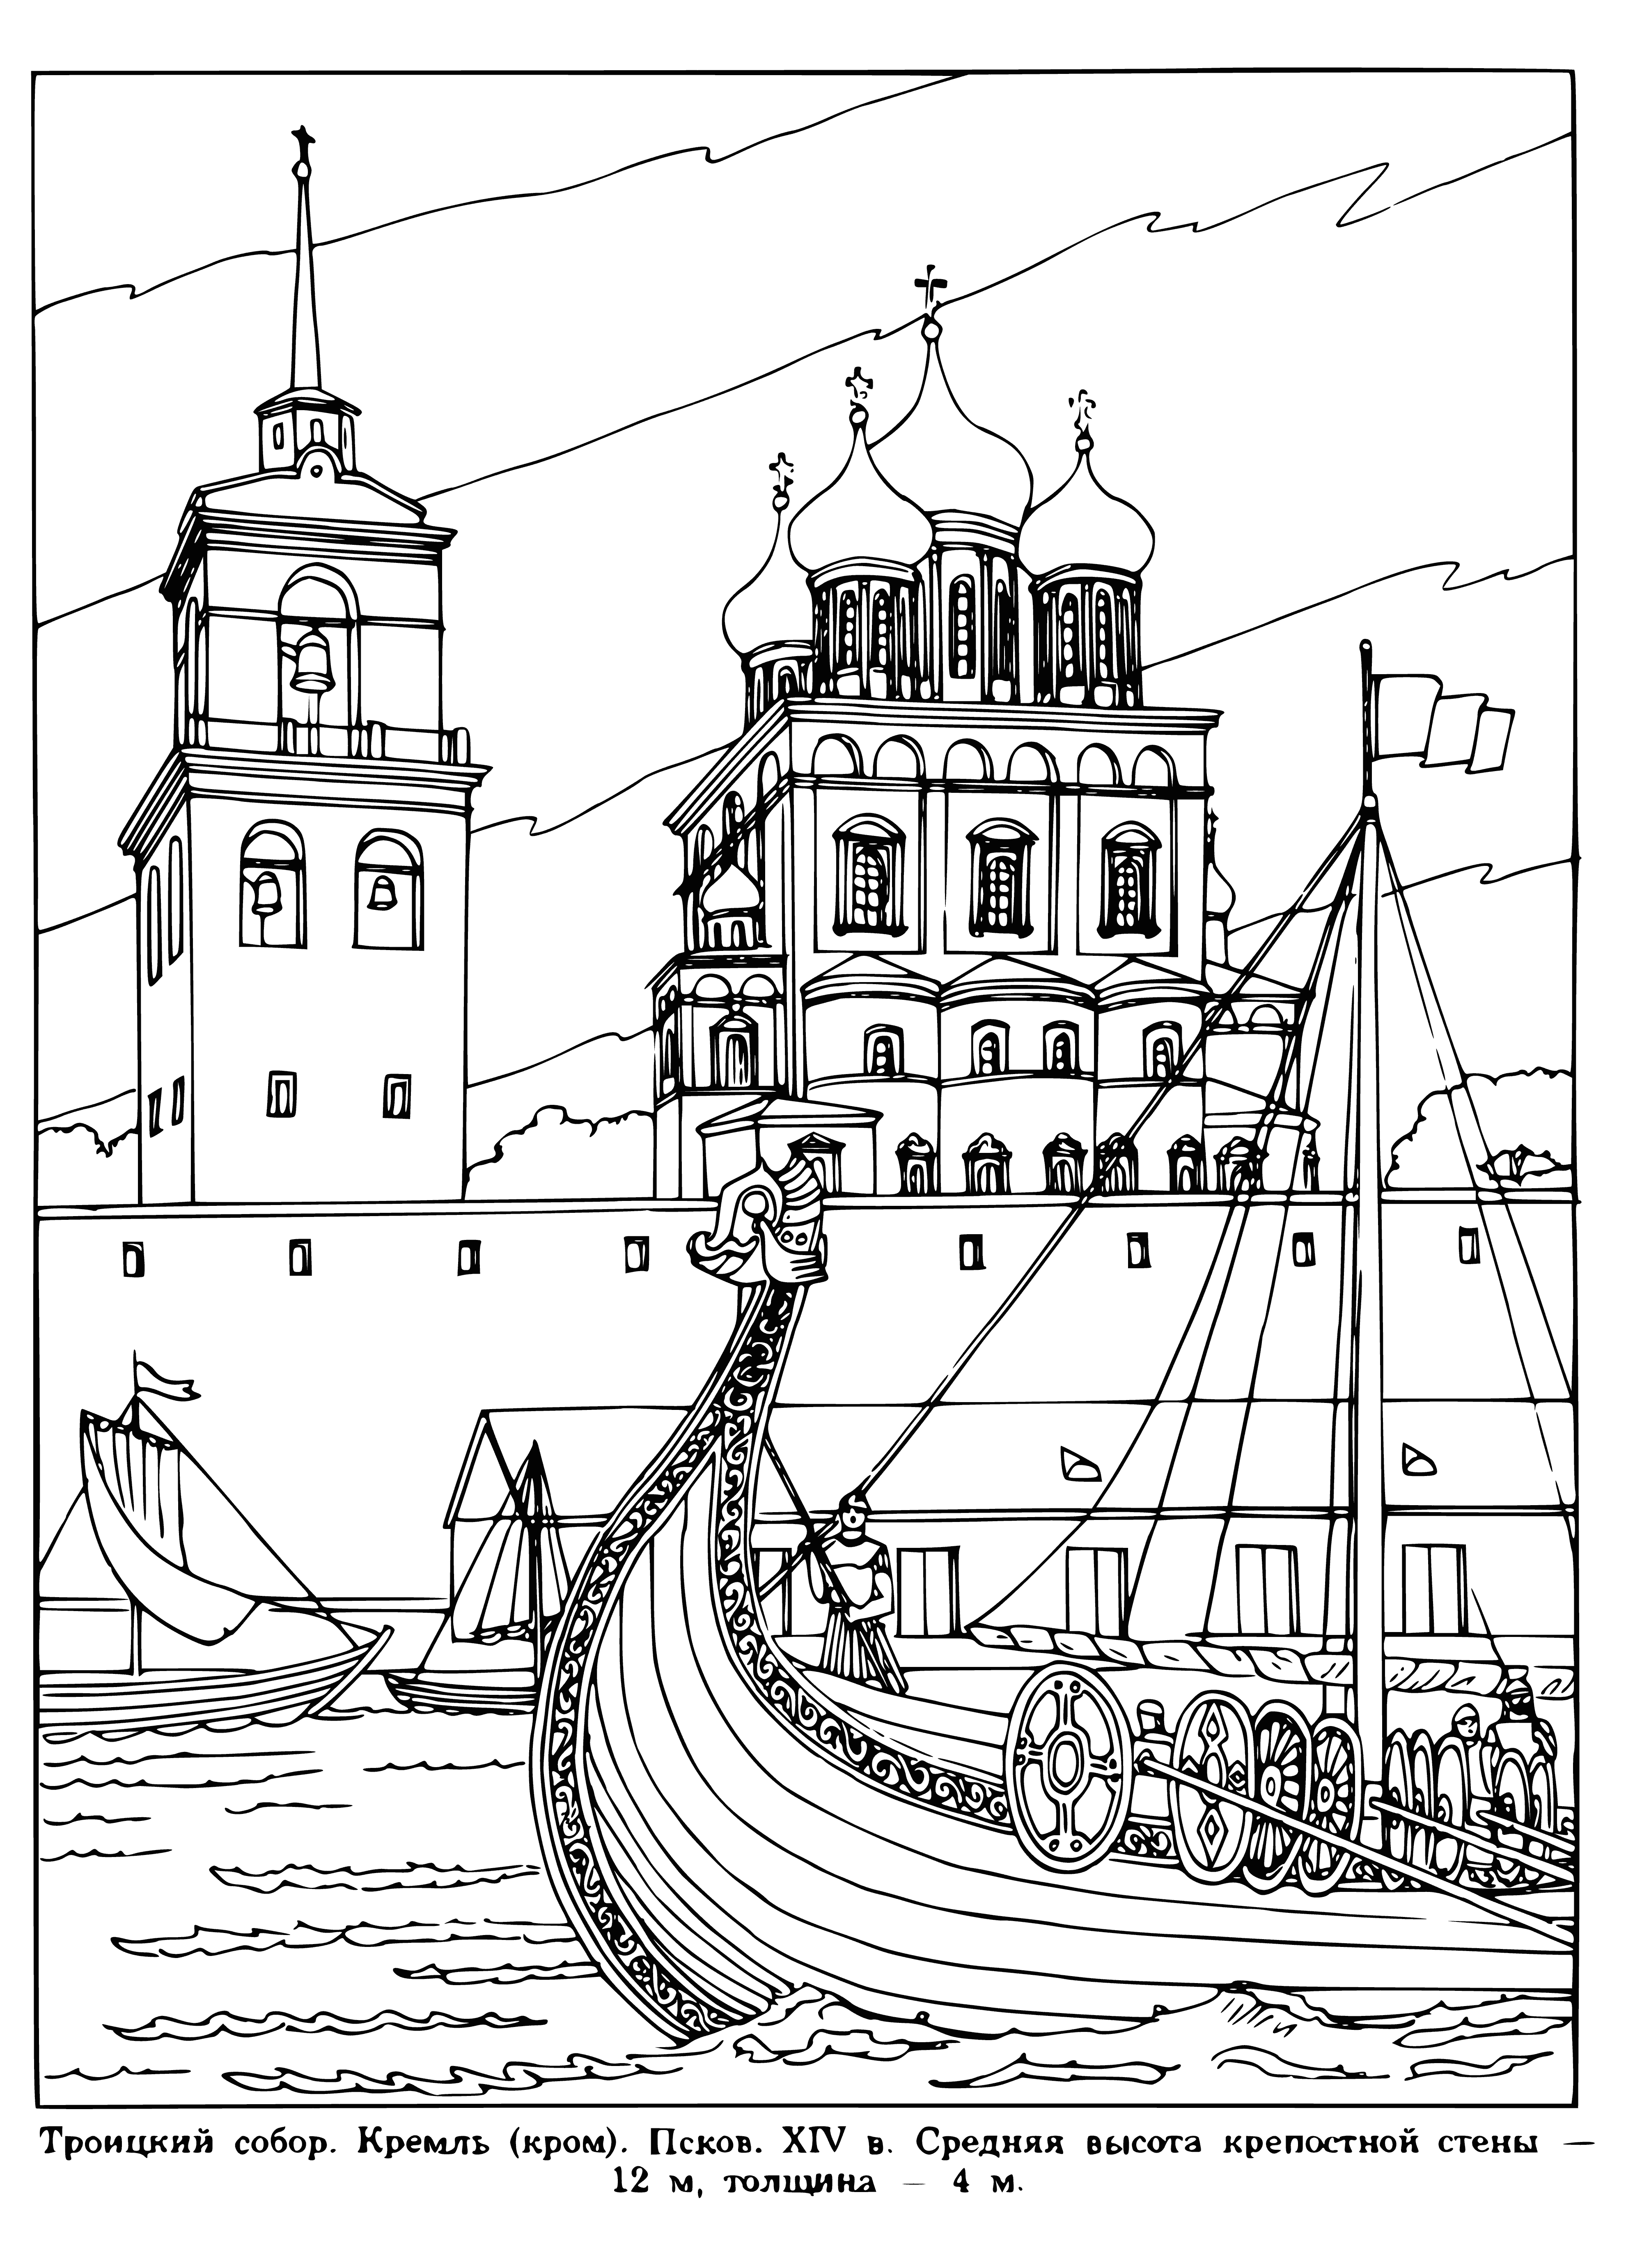 coloring page: A stone cathedral in Pskov with two towers, a metal roof and cross, surrounded by trees and grass.